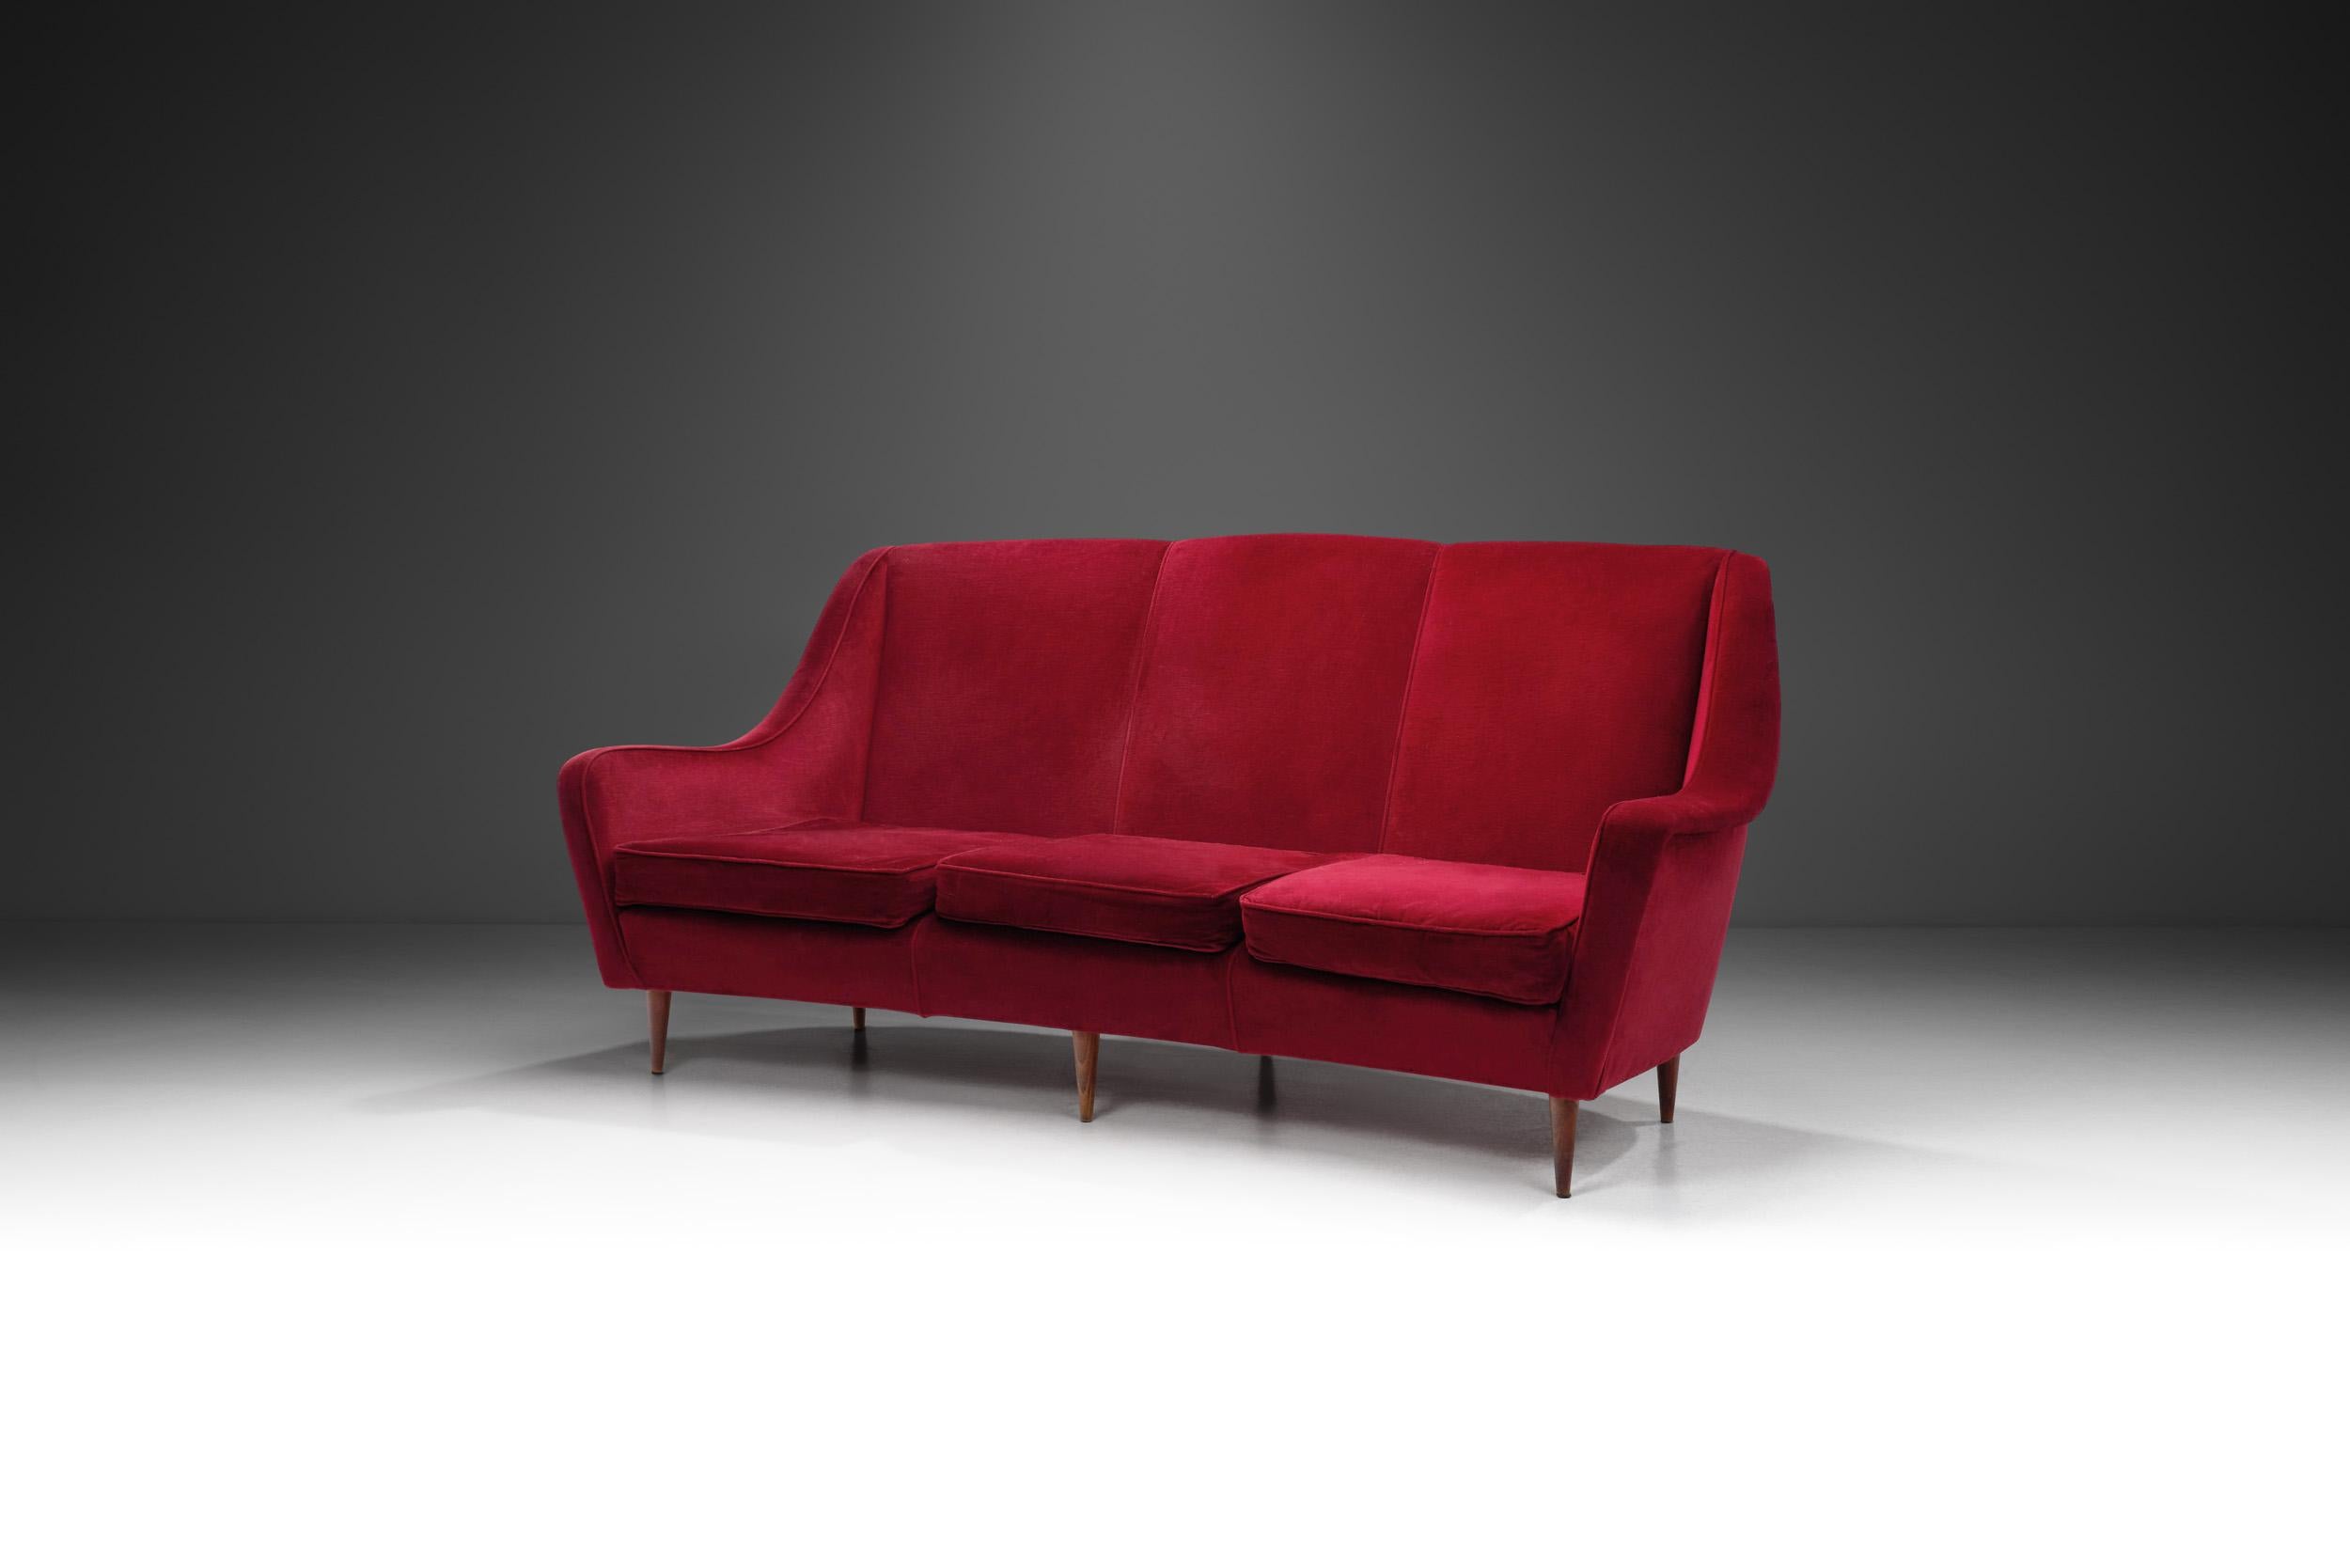 This Italian sofa from the 1950s exudes timeless charm and elegance. Cloaked in rich red velvet, this three-seater sofa visually demonstrates why the appeal of Italian mid-century furniture endures. Italian Modern furniture is defined by perfect